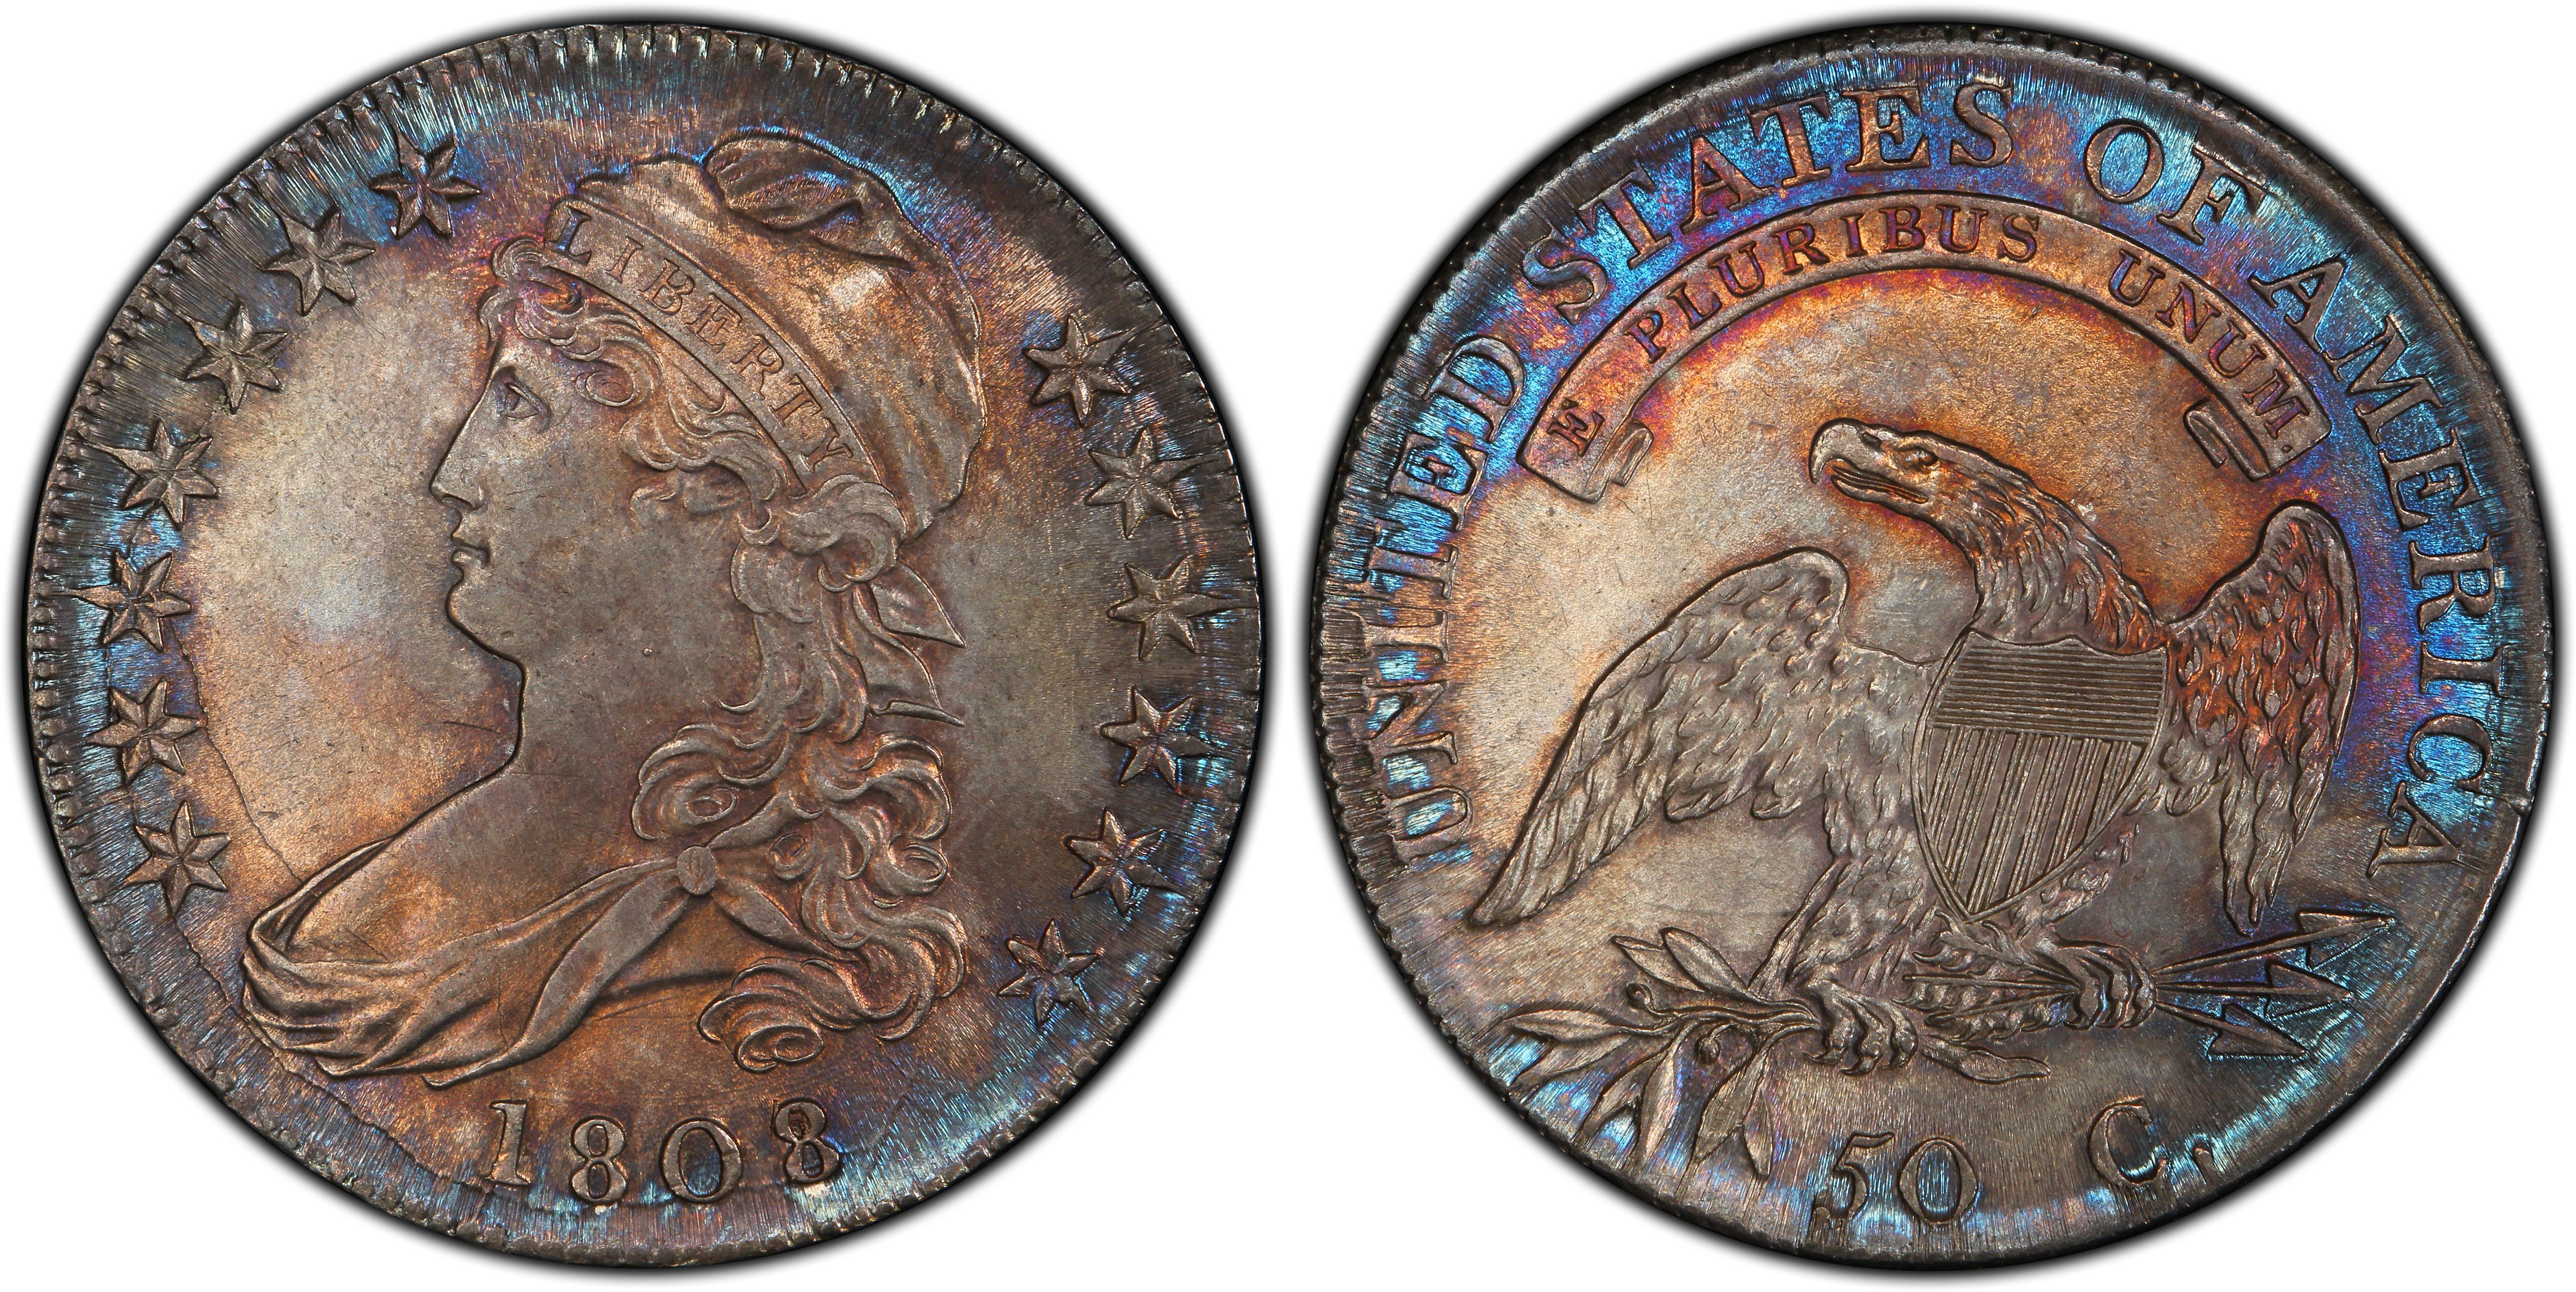 https://images.pcgs.com/CoinFacts/25583380_100229417_2200.jpg